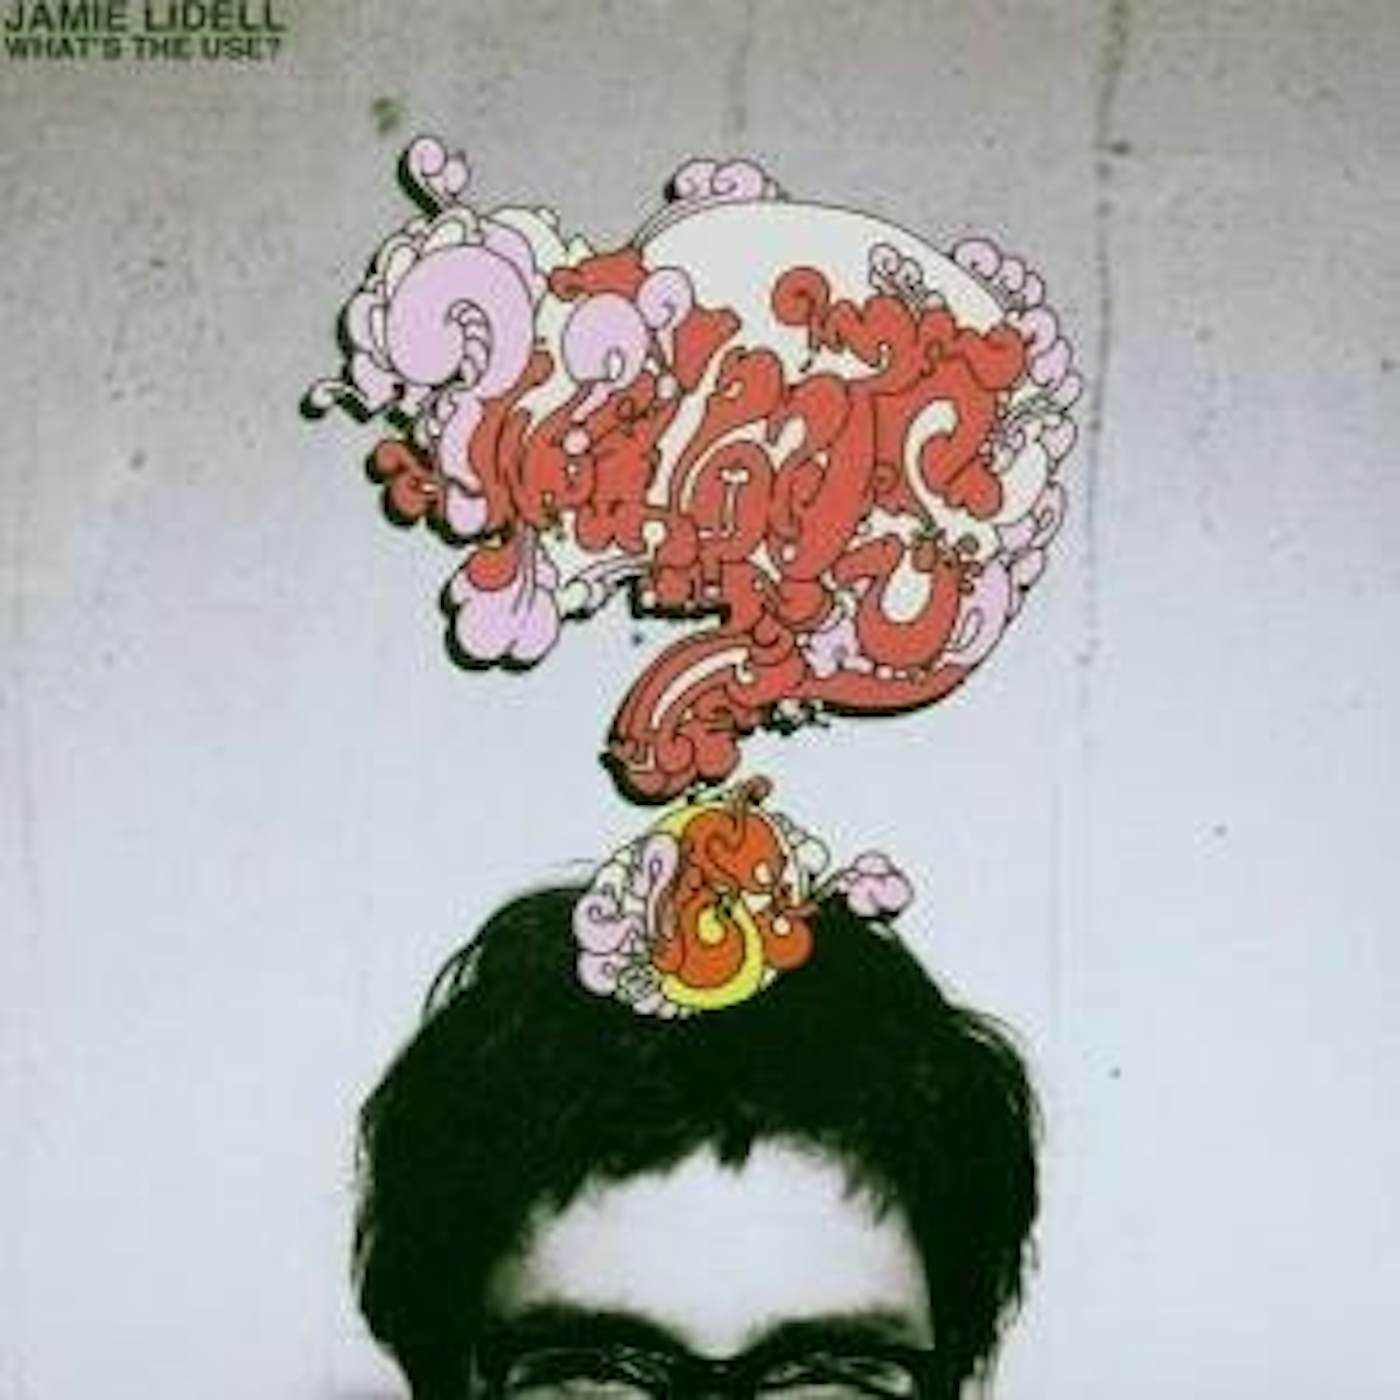 Jamie Lidell WHATS THE USE EP CD